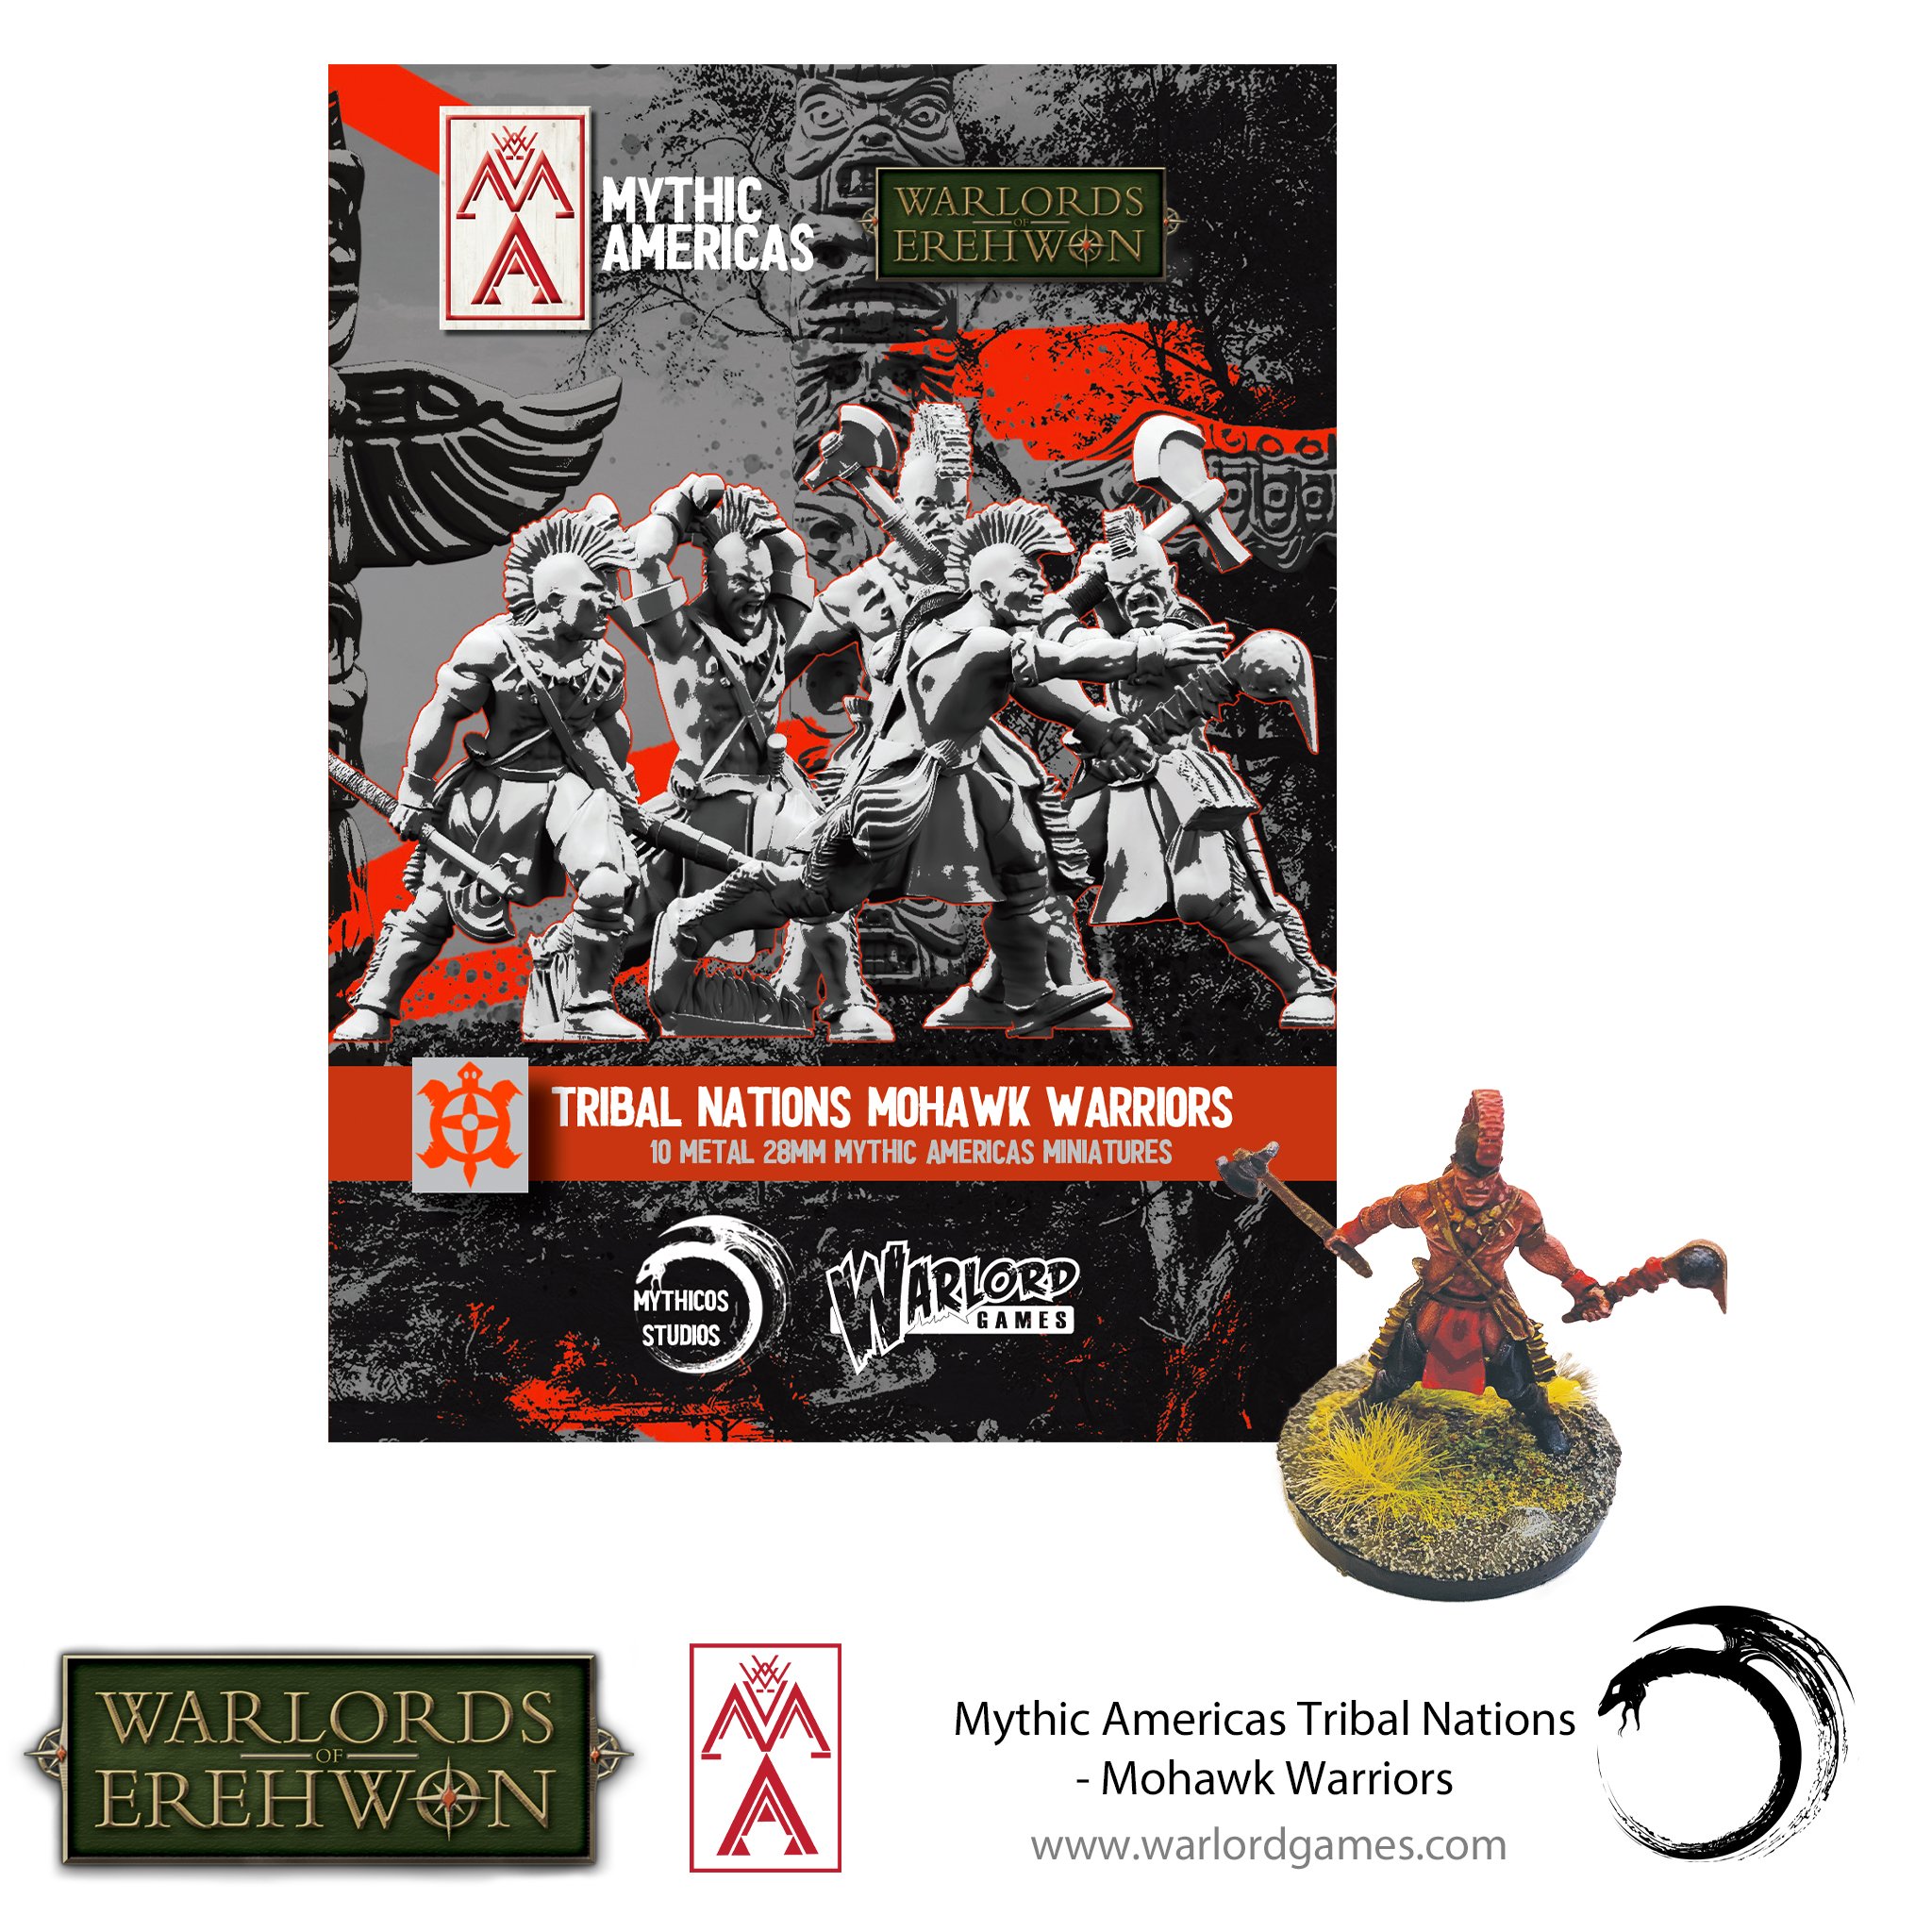 Warlords of Erehwon: Mythic Americas- Tribal Nations: Mohawk Warriors 